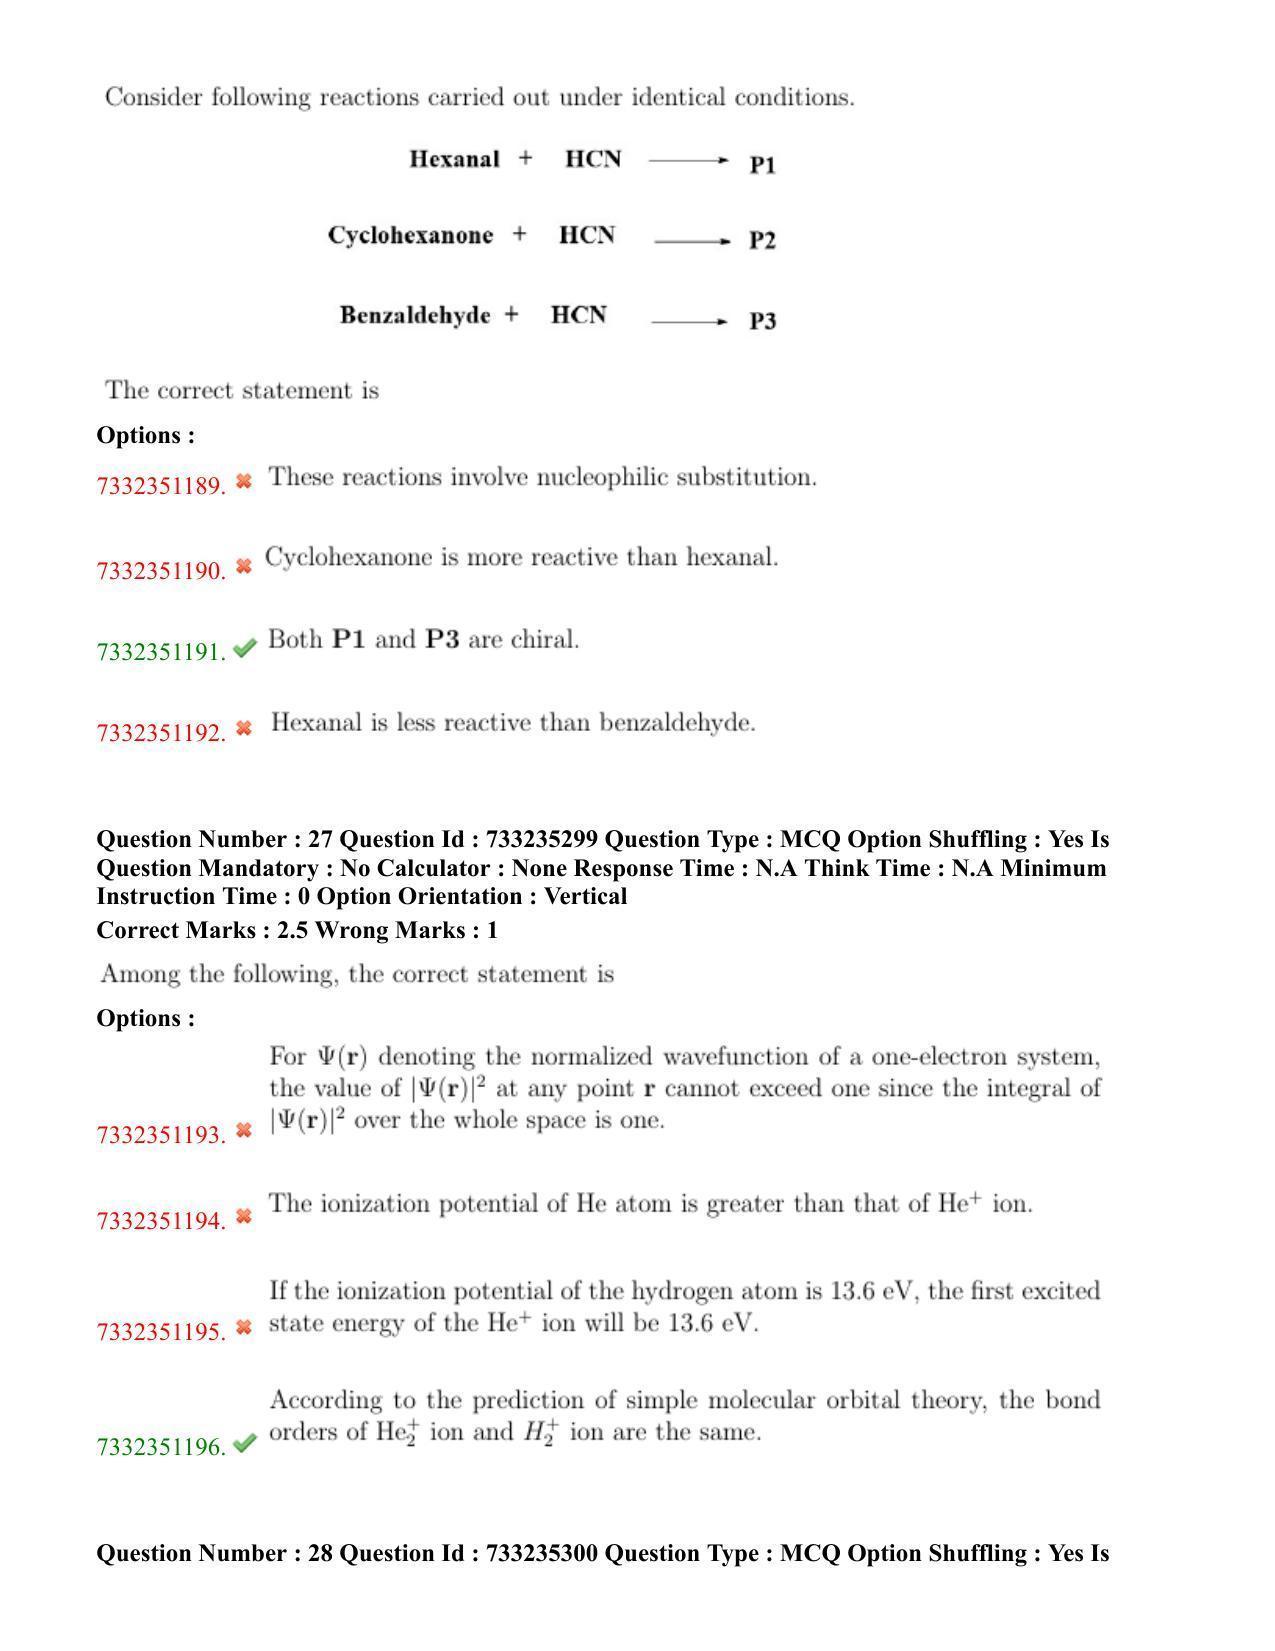 NEST Session II 2022 Question Paper - Page 20